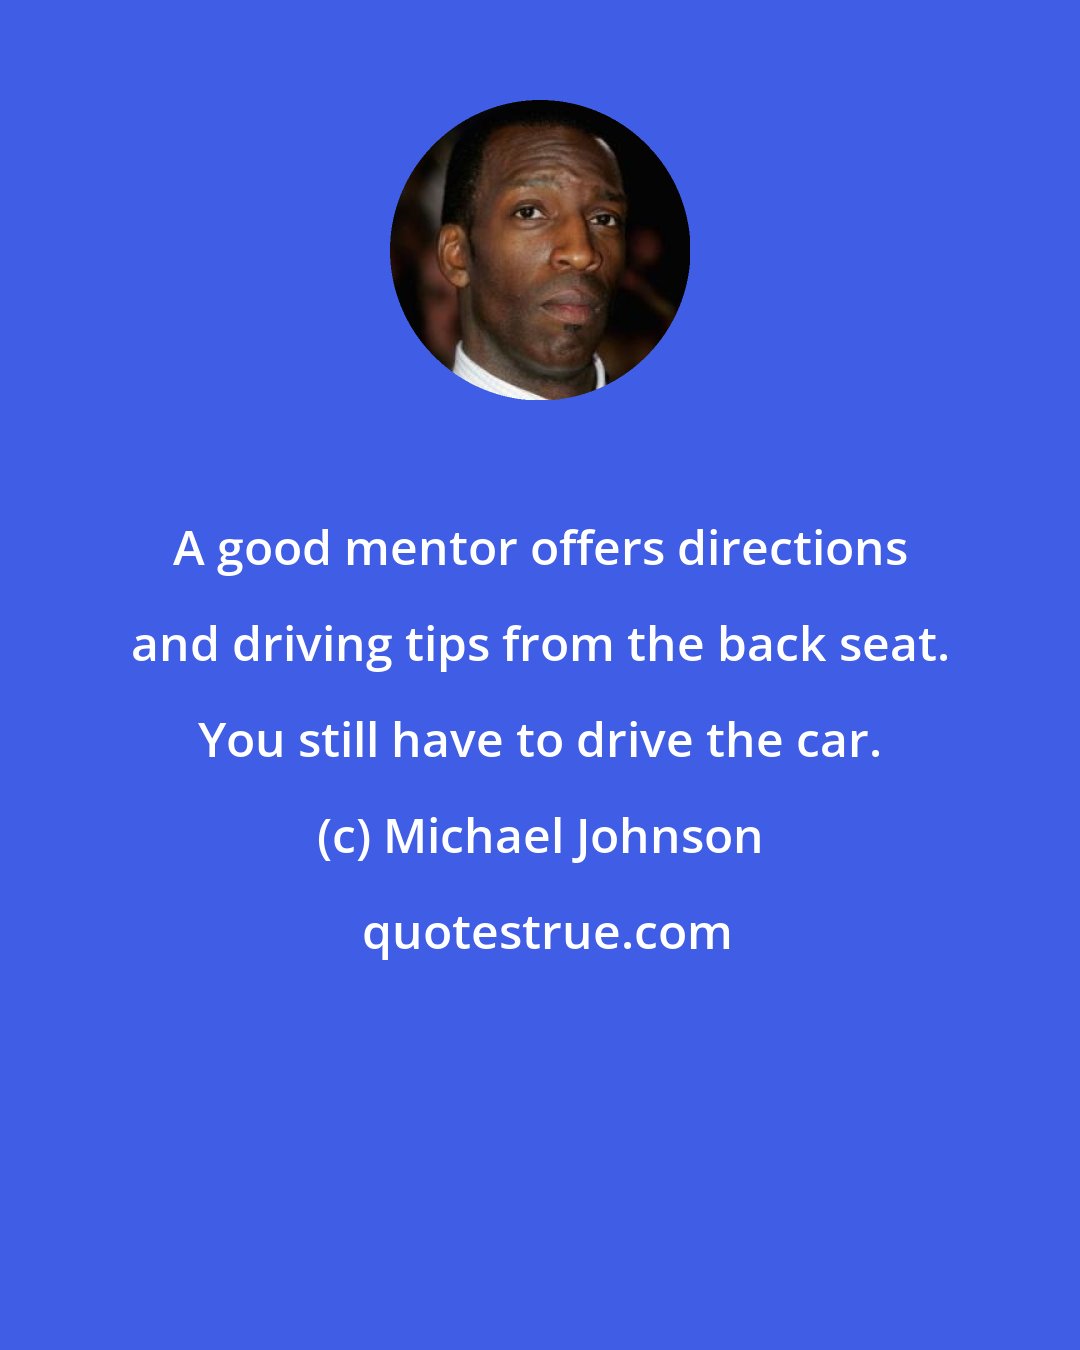 Michael Johnson: A good mentor offers directions and driving tips from the back seat. You still have to drive the car.